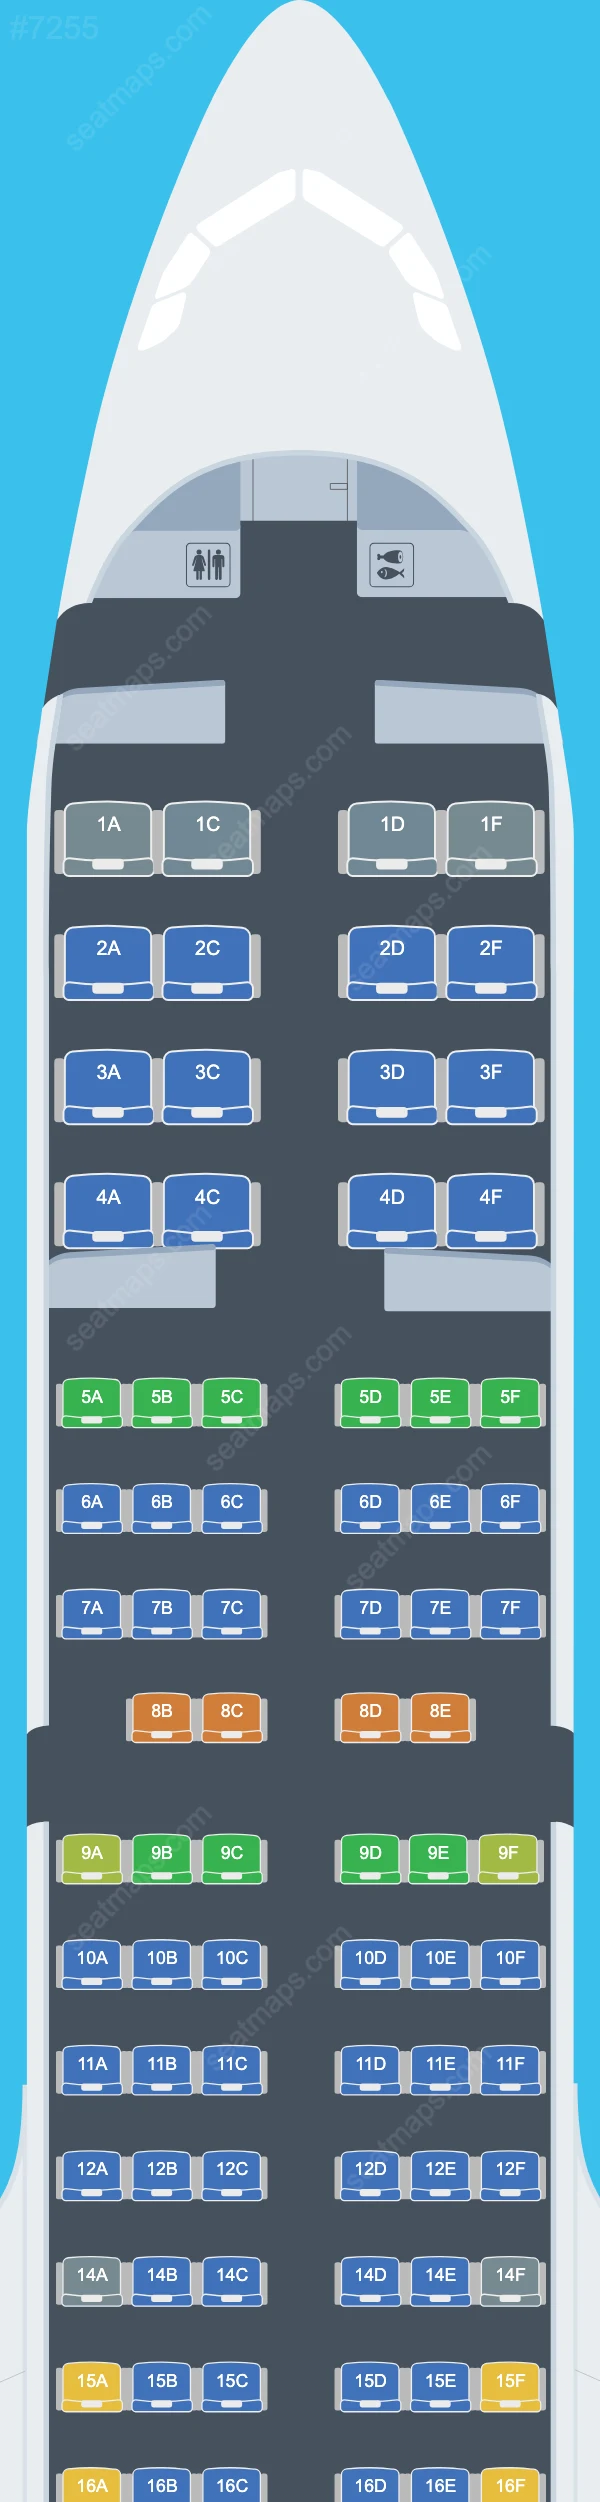 Azores Airlines Airbus A321 Seat Maps A321-200neo